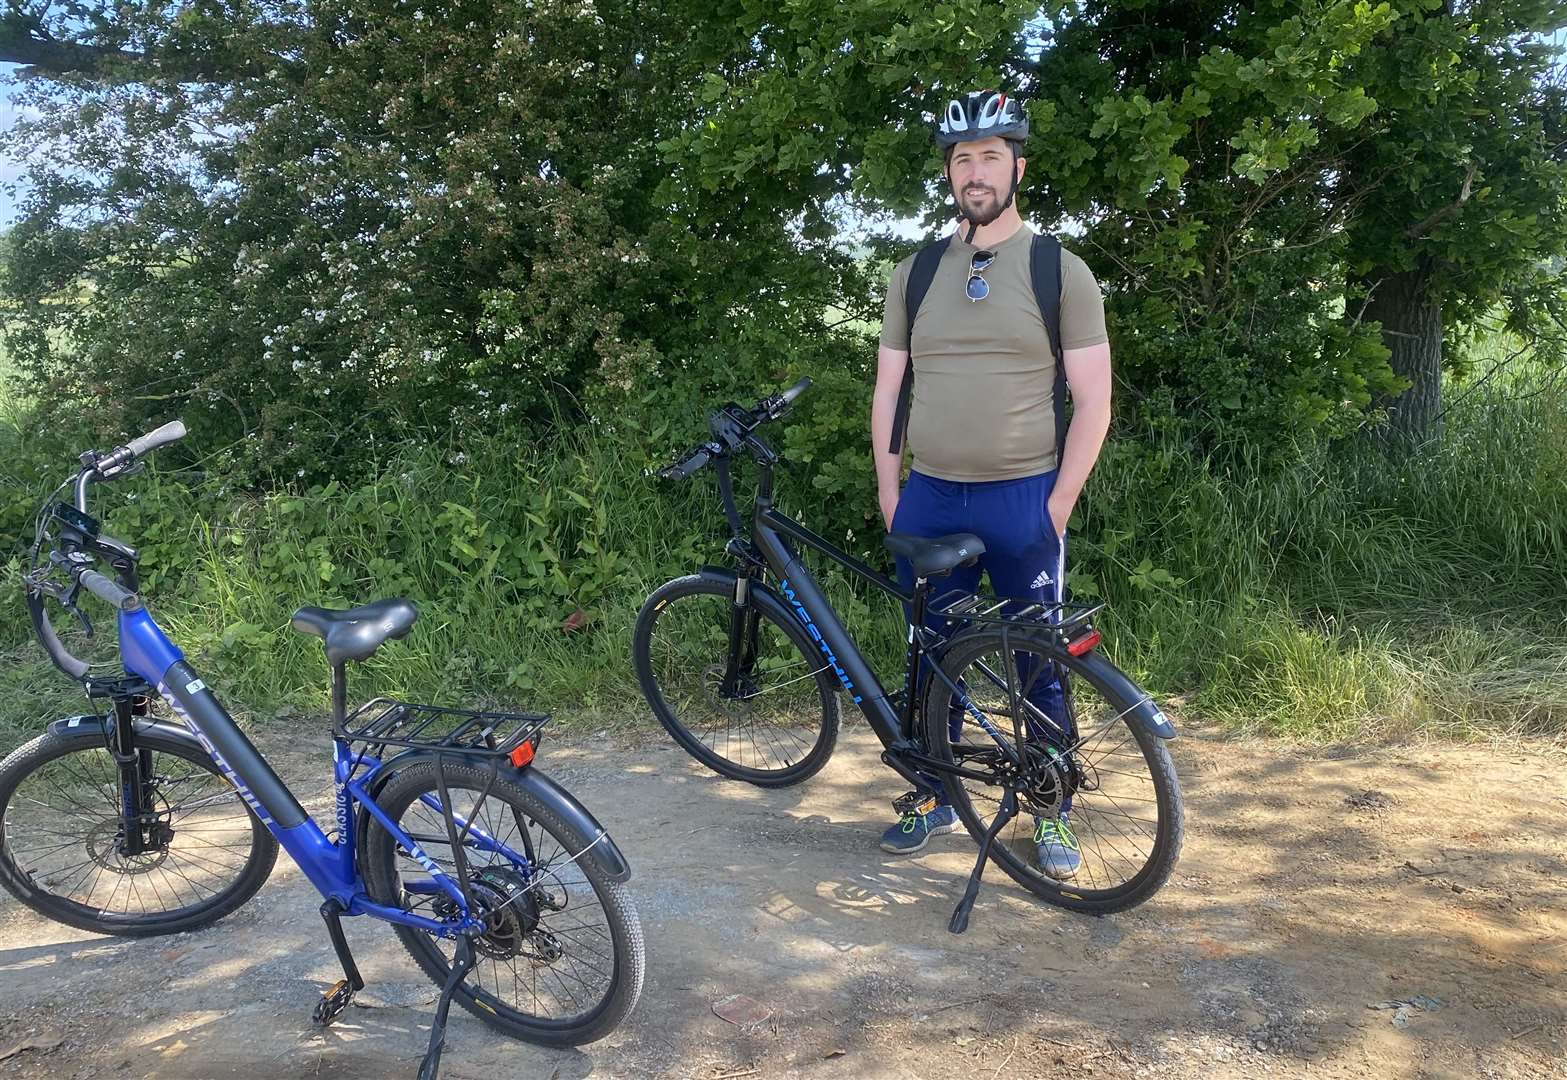 Standing with the eBikes we used